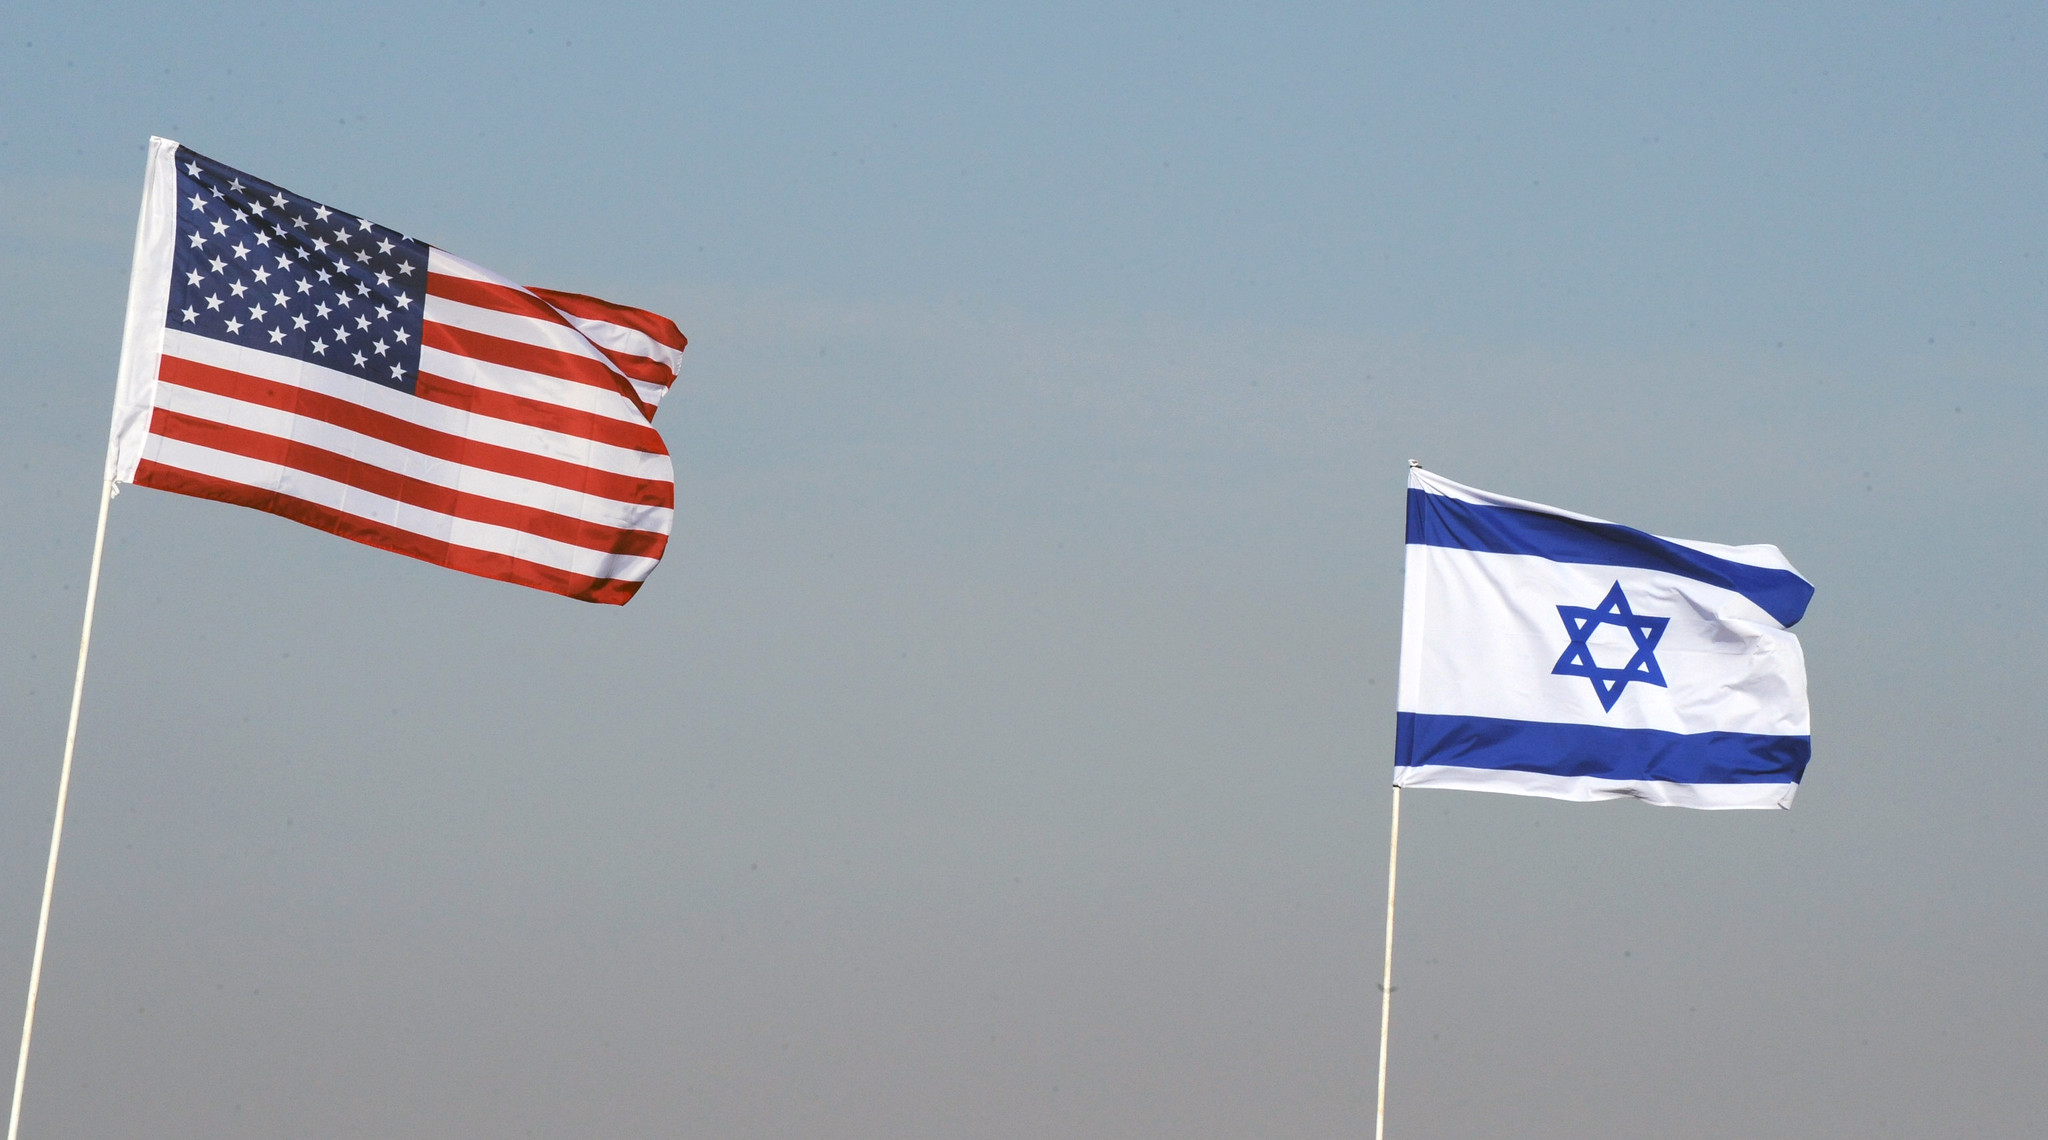 Israel’s Special Relationship With the US Can’t Depend Solely on a Cold Account of Interests